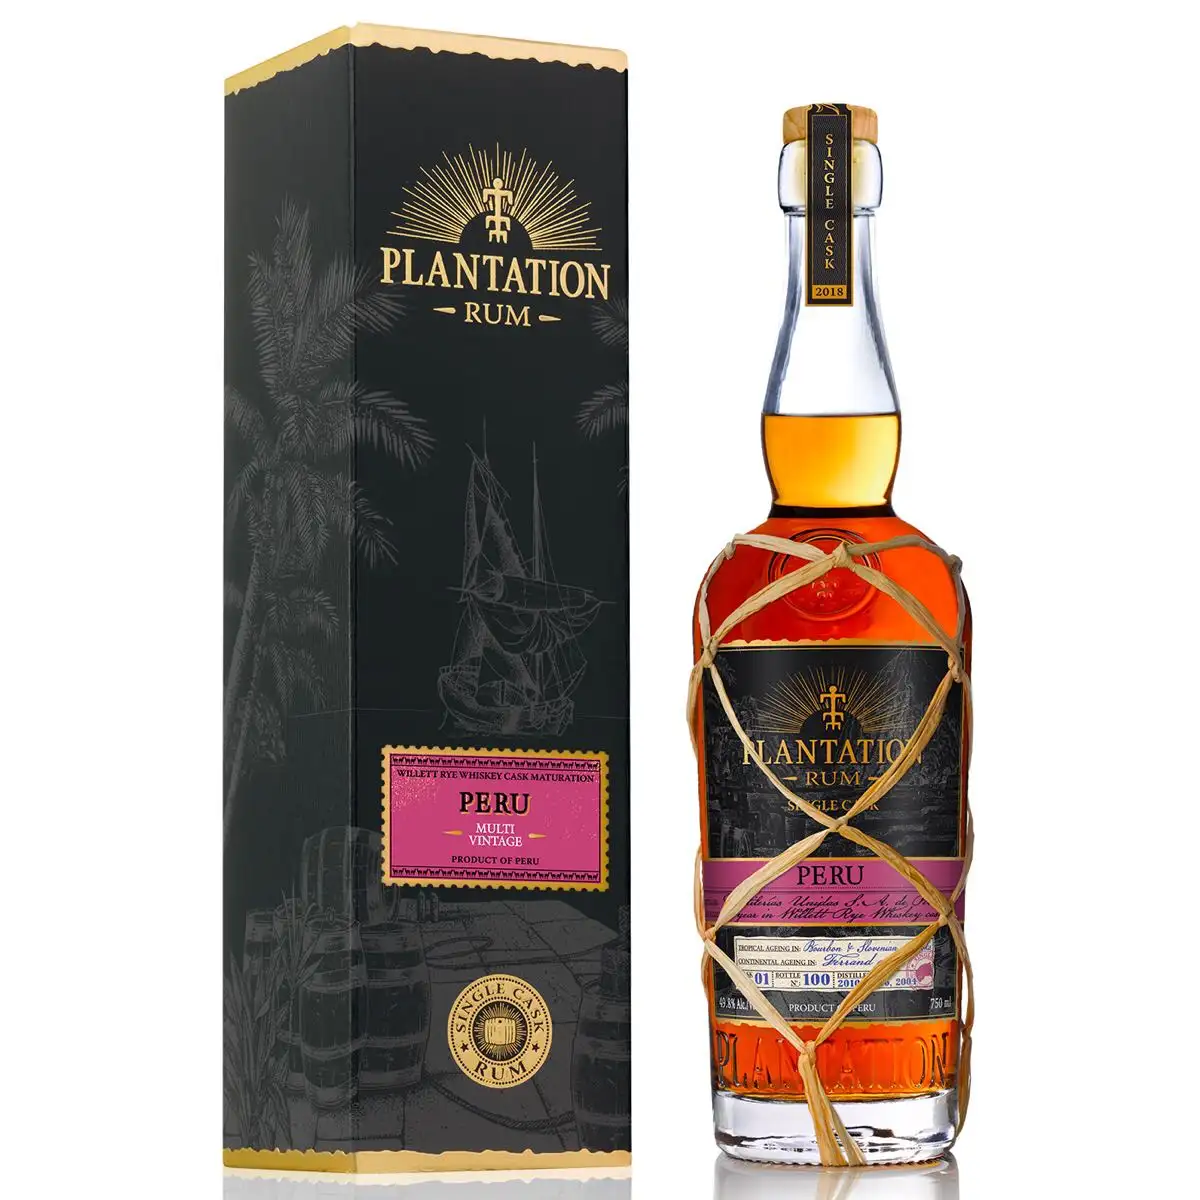 Image of the front of the bottle of the rum Plantation Peru Multi Vintage